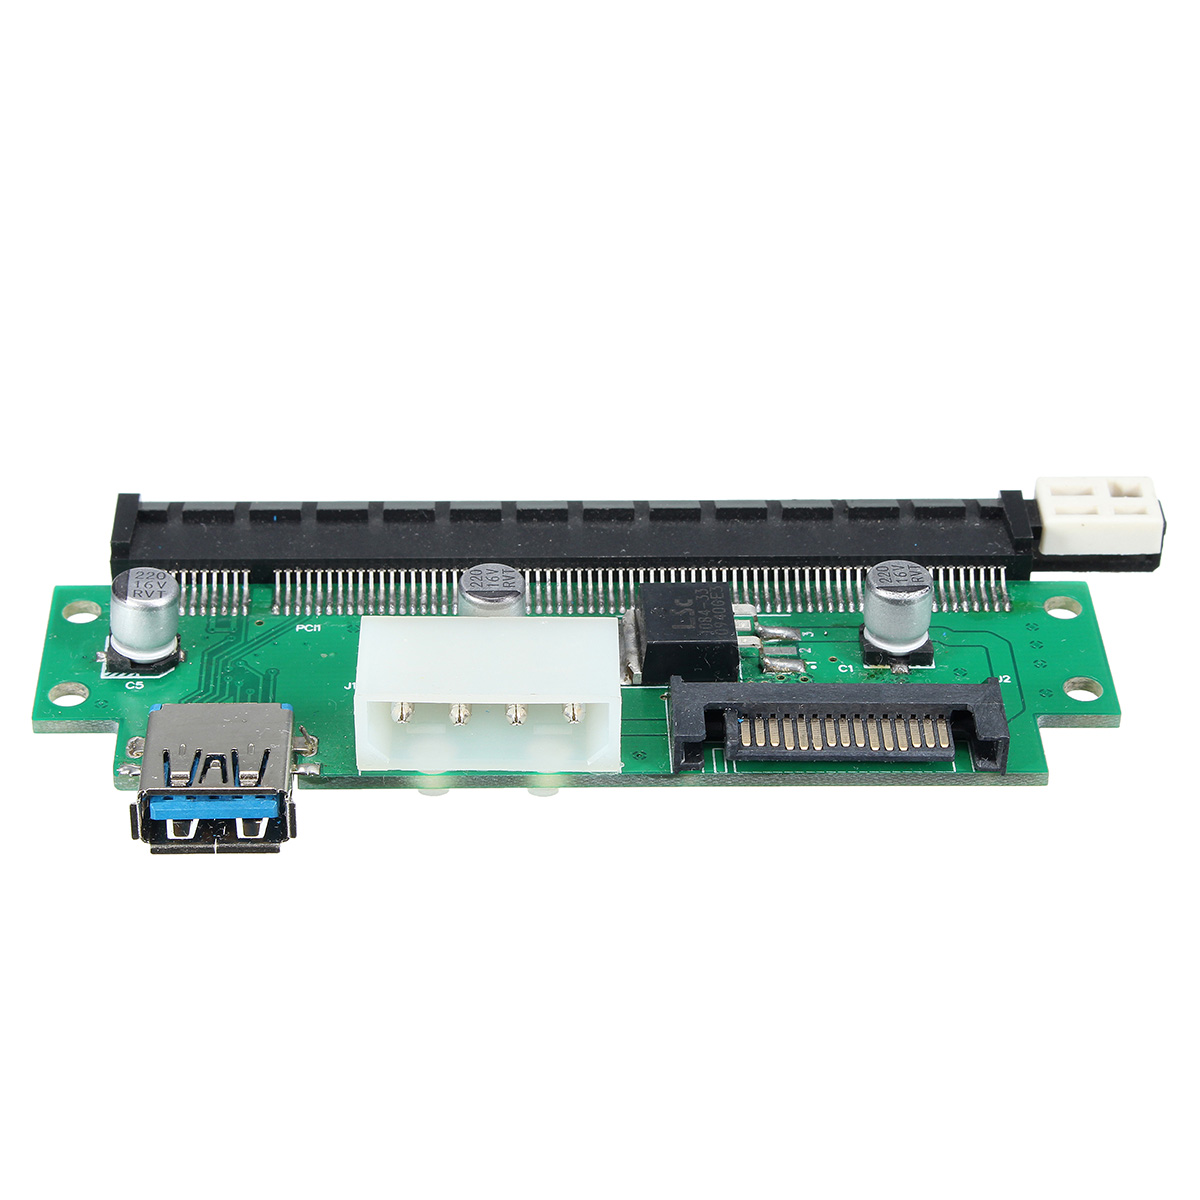 PCI-E-1X-to-16X-Extended-Card-Adapter-USB-30-Extender-Mining-Rig-Graphics-Card-Extension-Adapter-wit-1941181-7